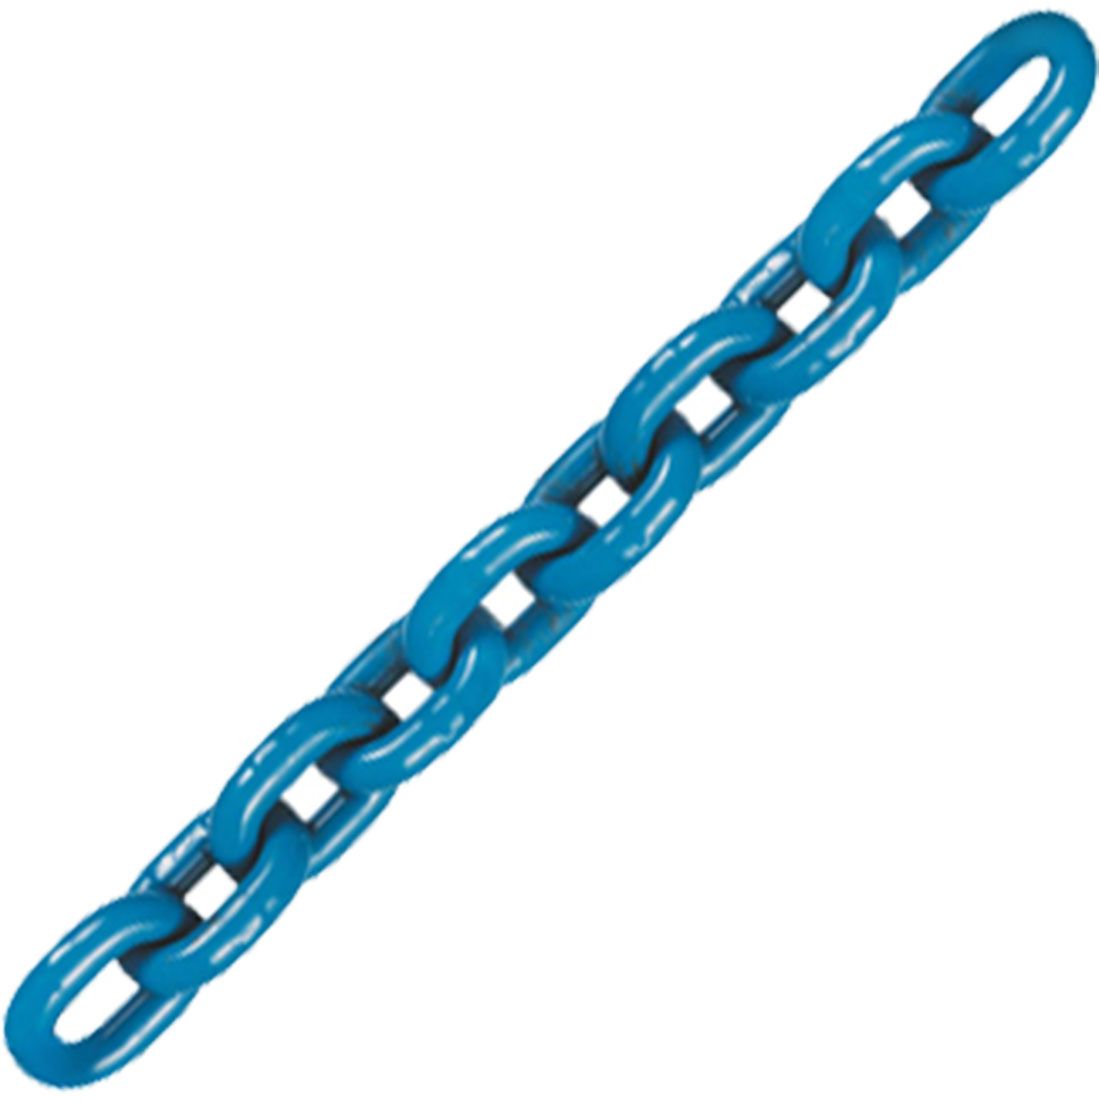 5/16" Grade 100 Alloy Chain x 20 FT for Lifting Tow Overhead 5,700 lbs Rigging 